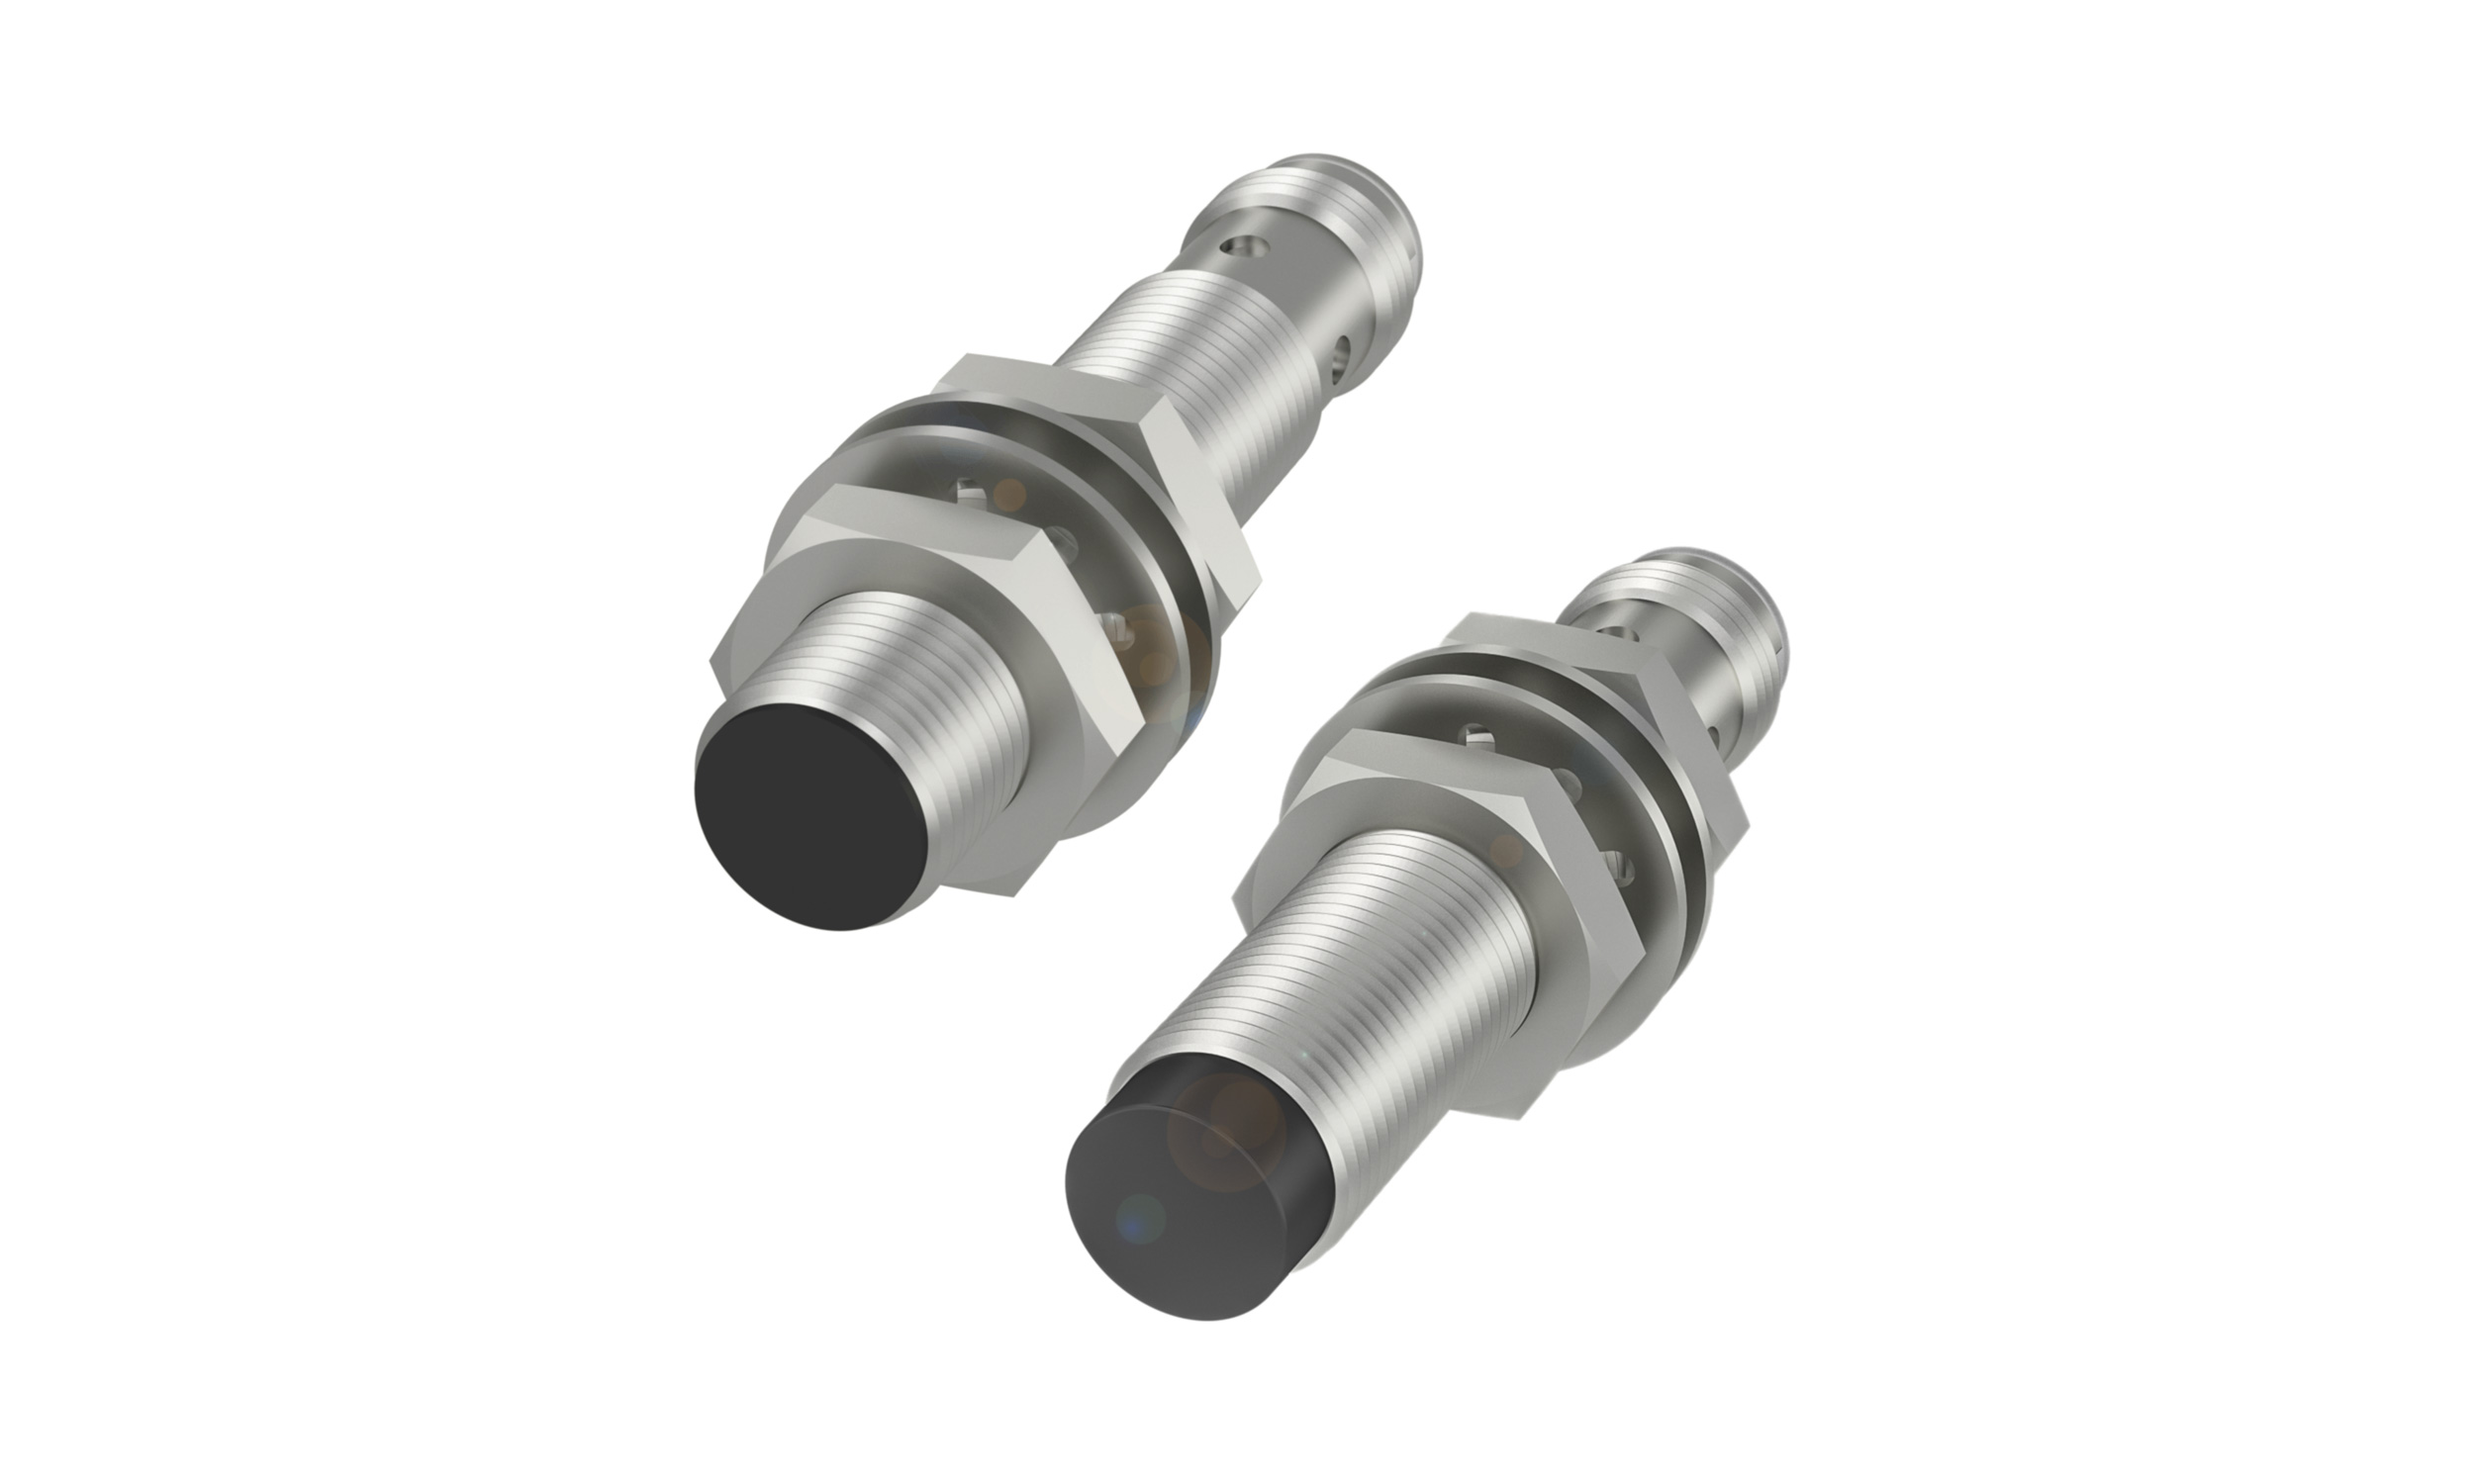 Inductive IO-Link sensors with extended switching distance